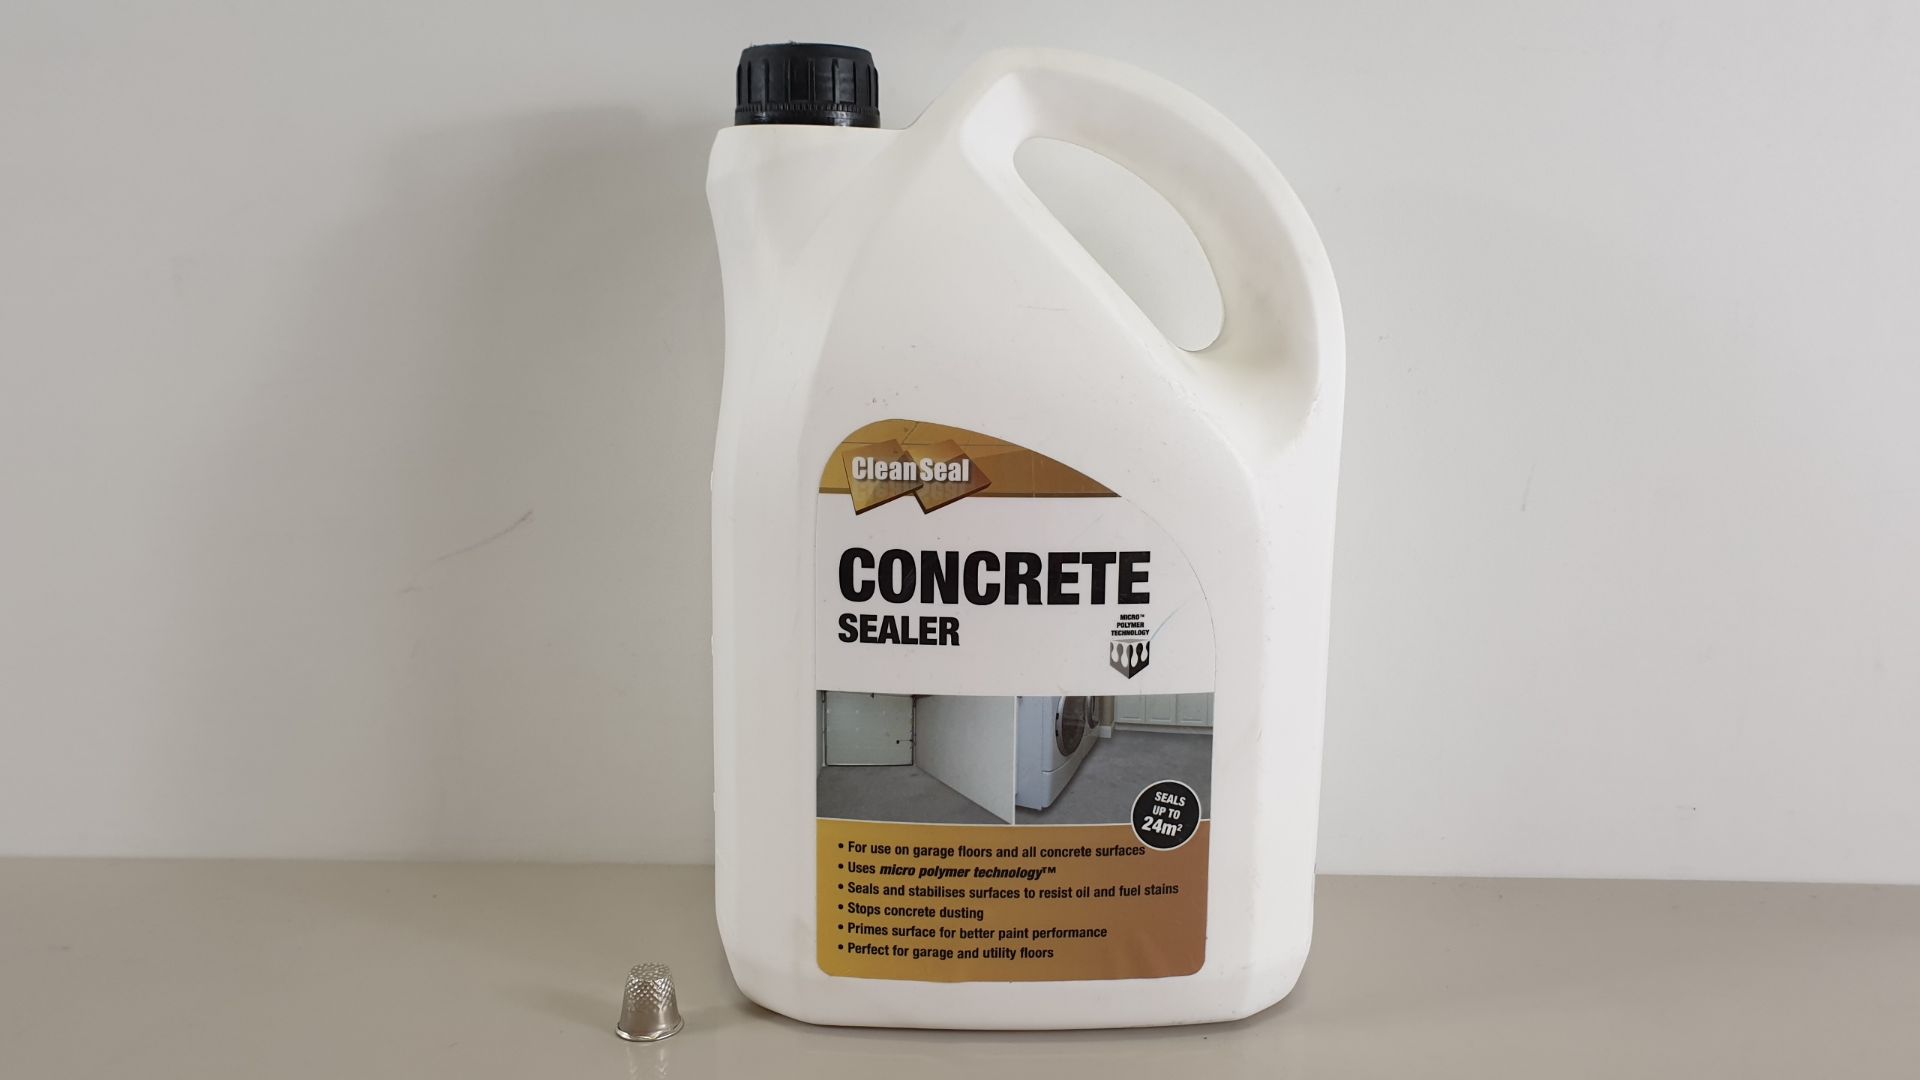 FULL PALLET CONTAINING 144 X 4L CLEANSEAL CONCRETE SEALER WHICH USES MICRO POLYMER TECHNOLOGY